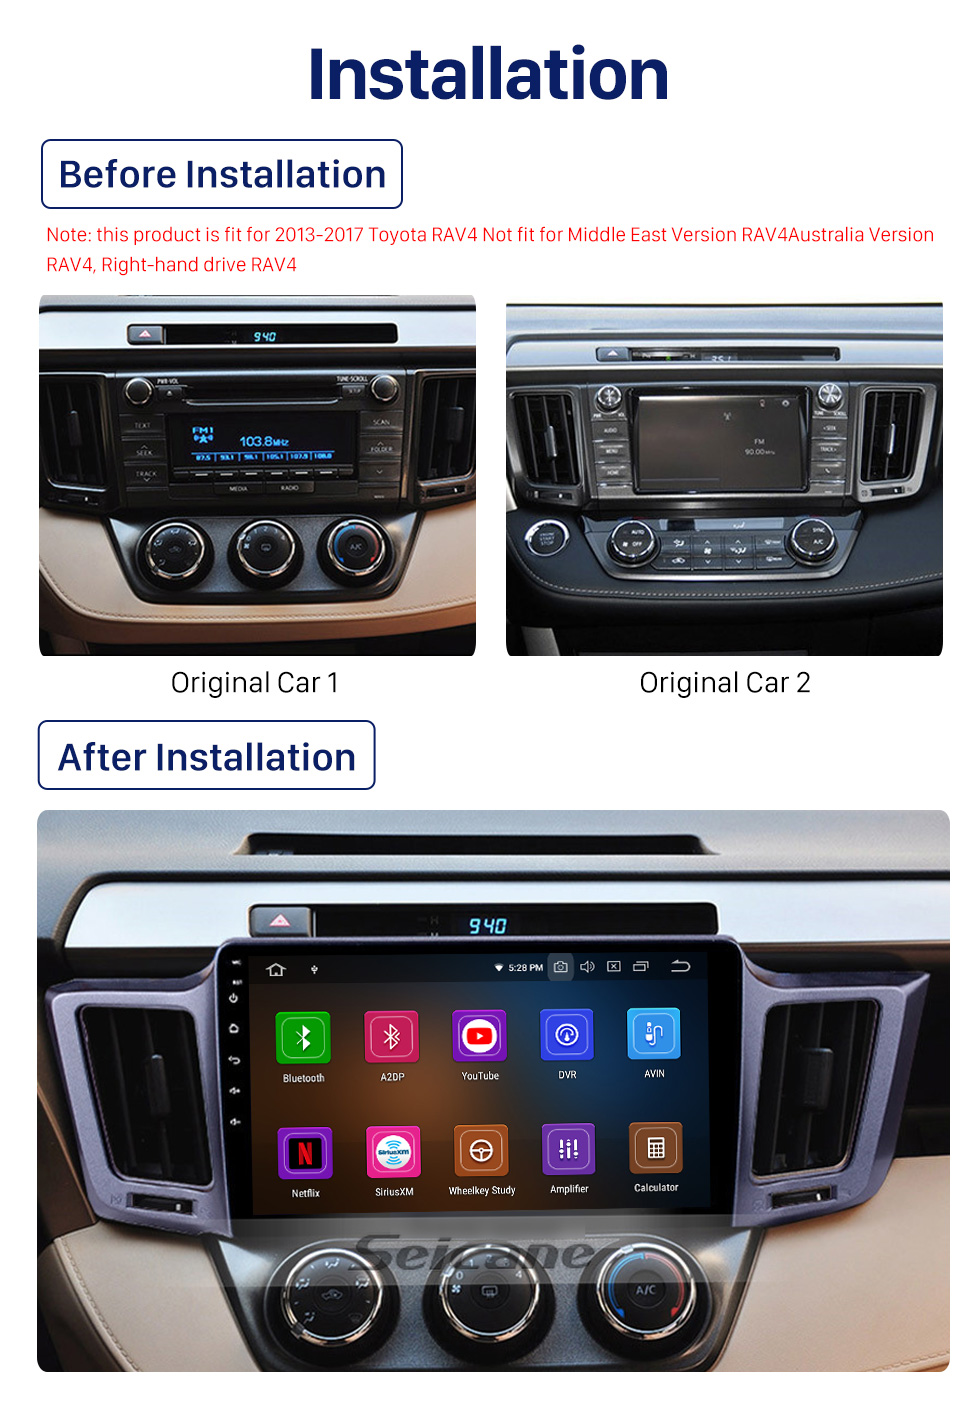 Seicane 2013-2016 Toyota RAV4 10.1 inch Android 10.0 GPS Sat Nav In Car with Touch Screen 3G WiFi AM FM Radio Bluetooth Music USB support OBD2 DVR TPMS